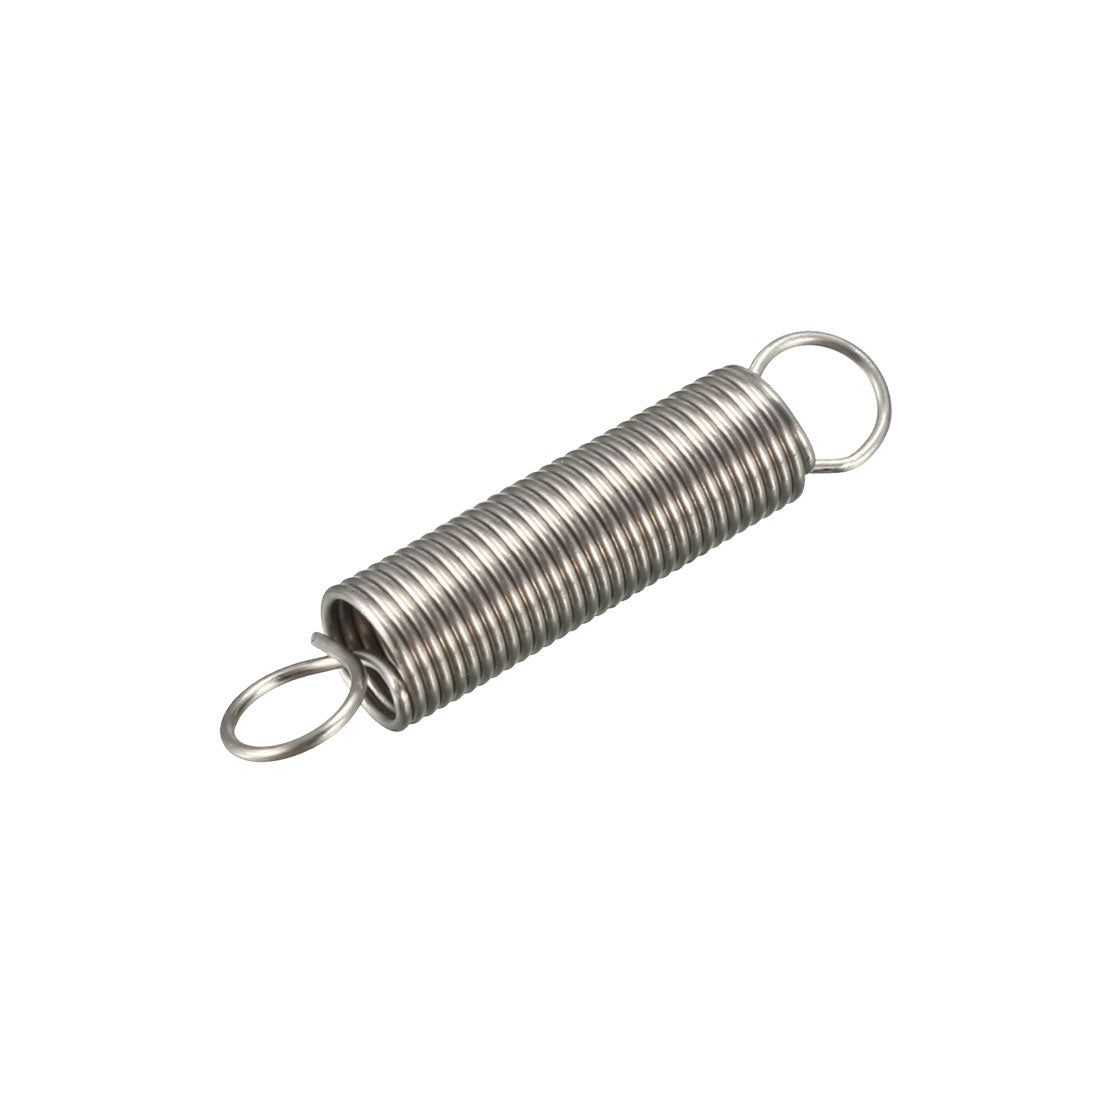 uxcell Uxcell Extended Tension Spring Wire Diameter 0.016", OD 0.16", Free Length 0.79" 15pcs